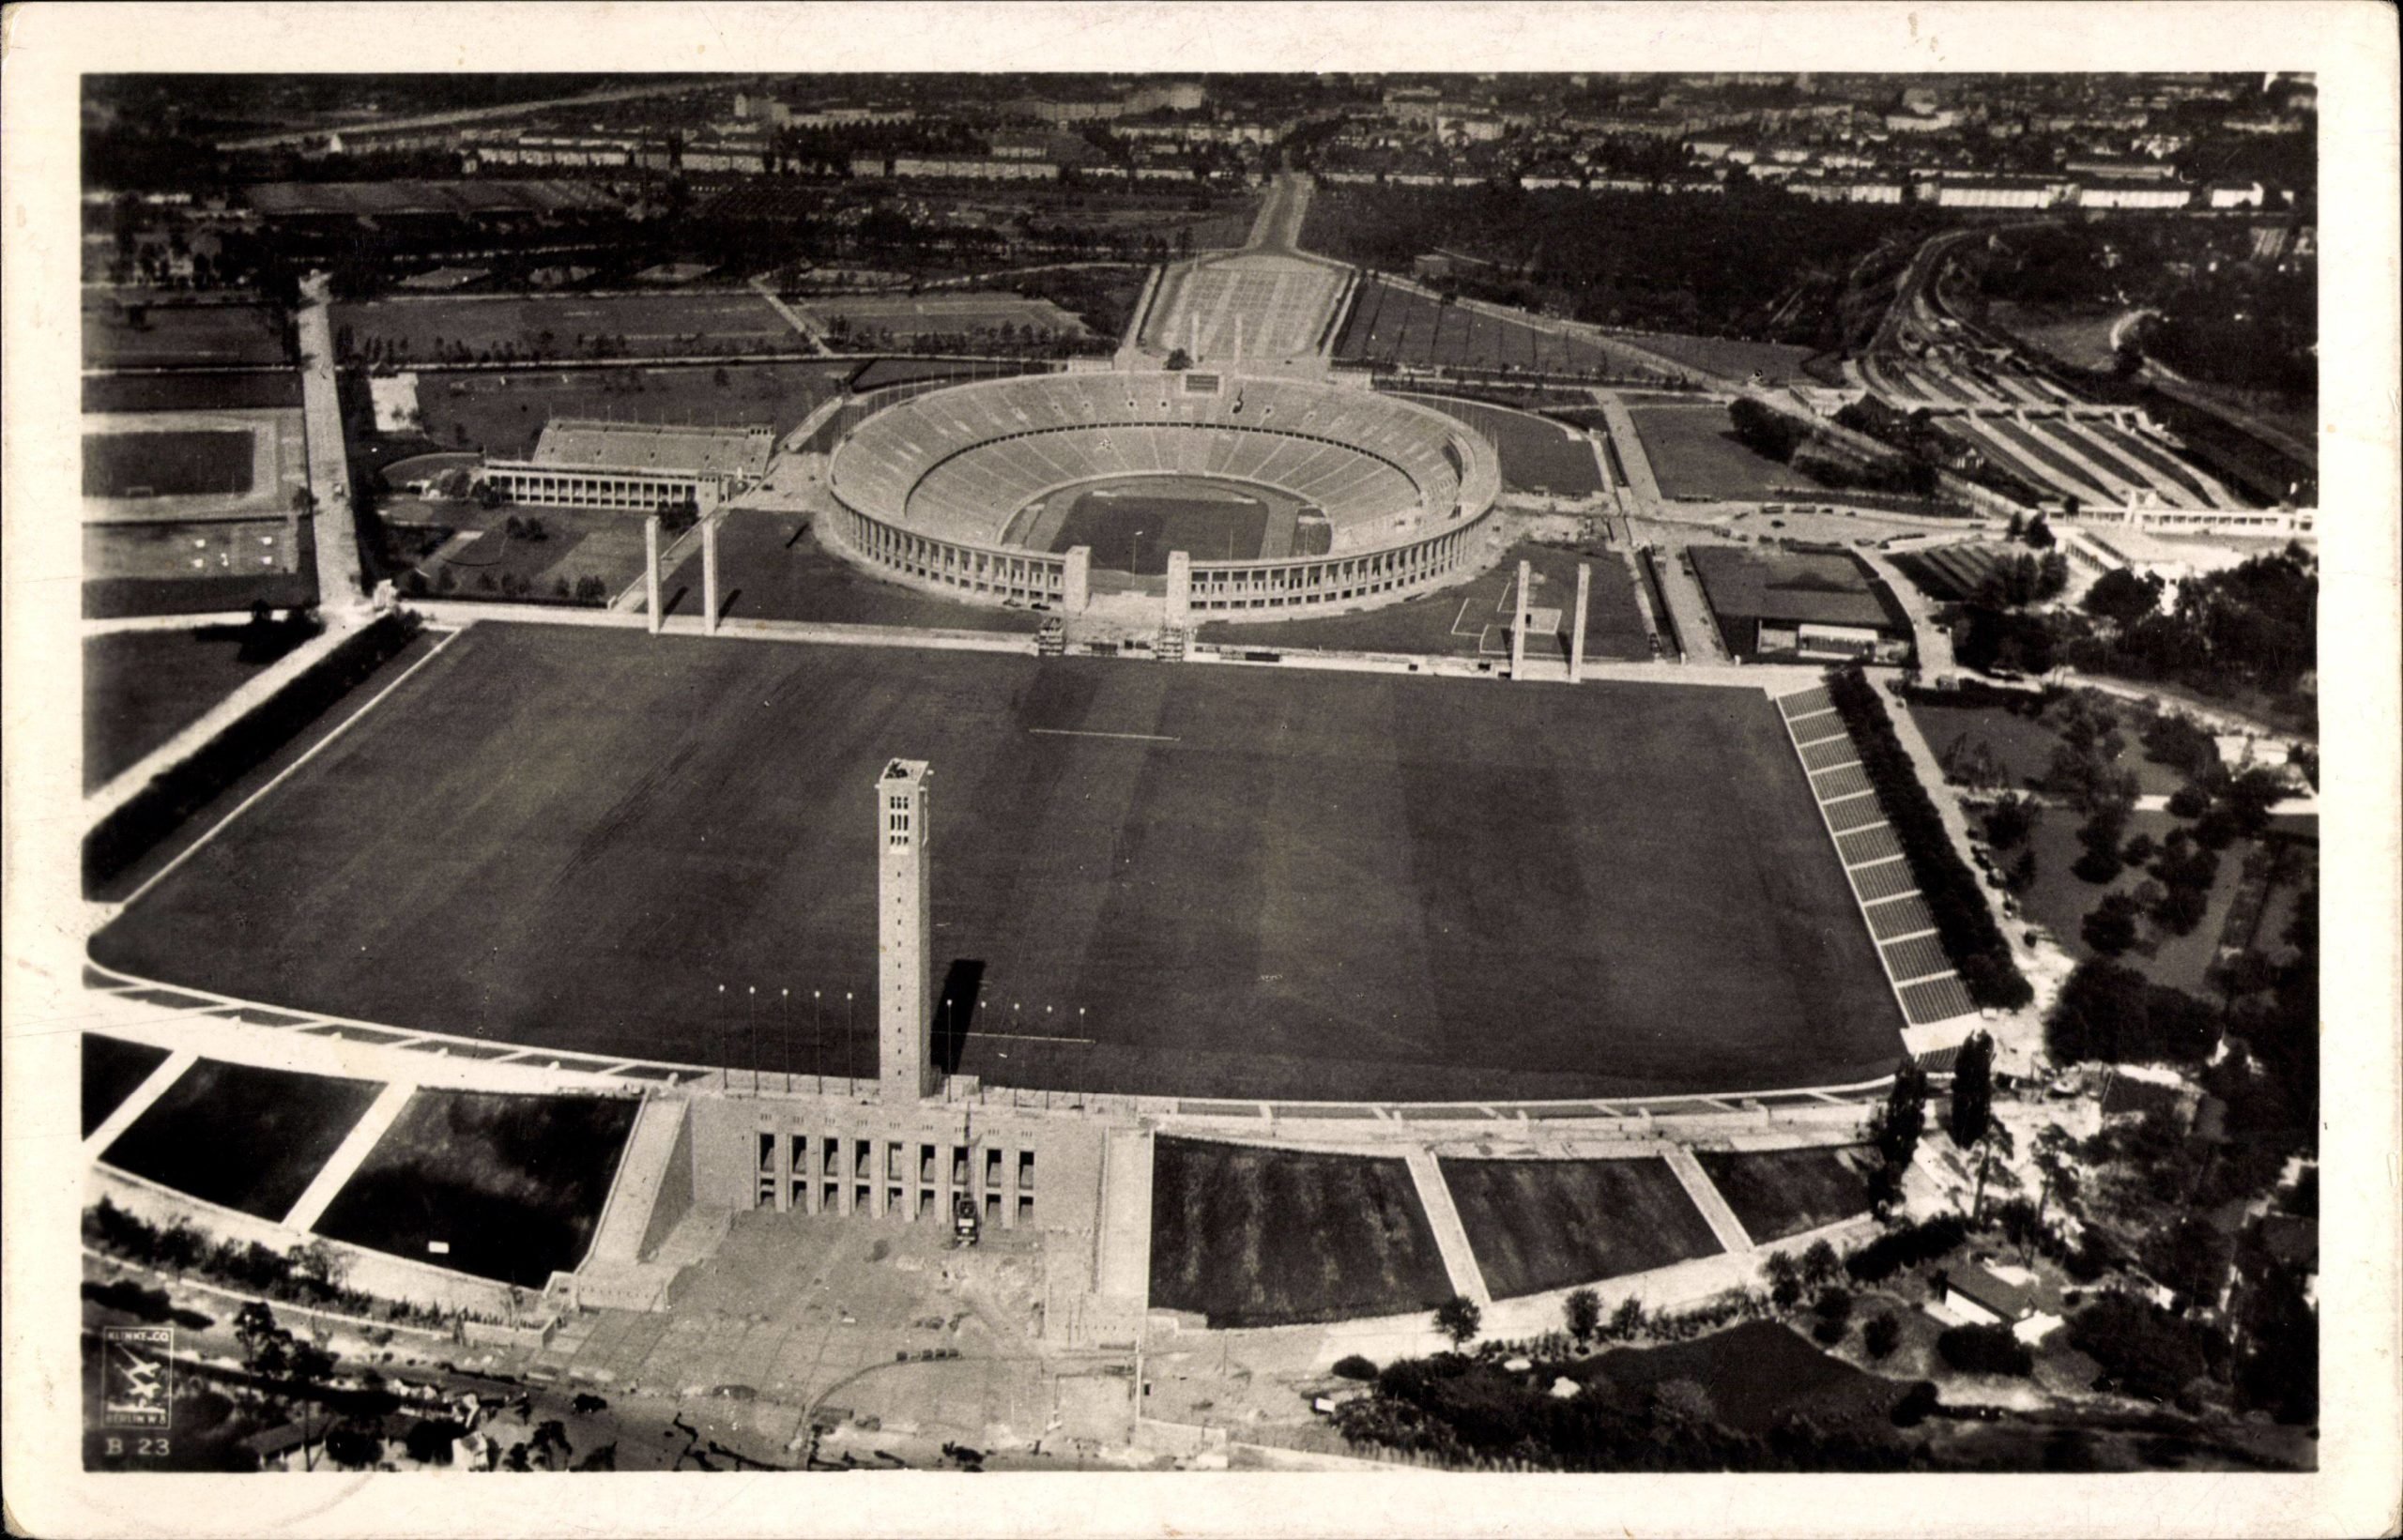 Today's Olympic site, then "Reichssportfeld", in an aerial photo from the 1930s.  Photo: Imago/Arkivi